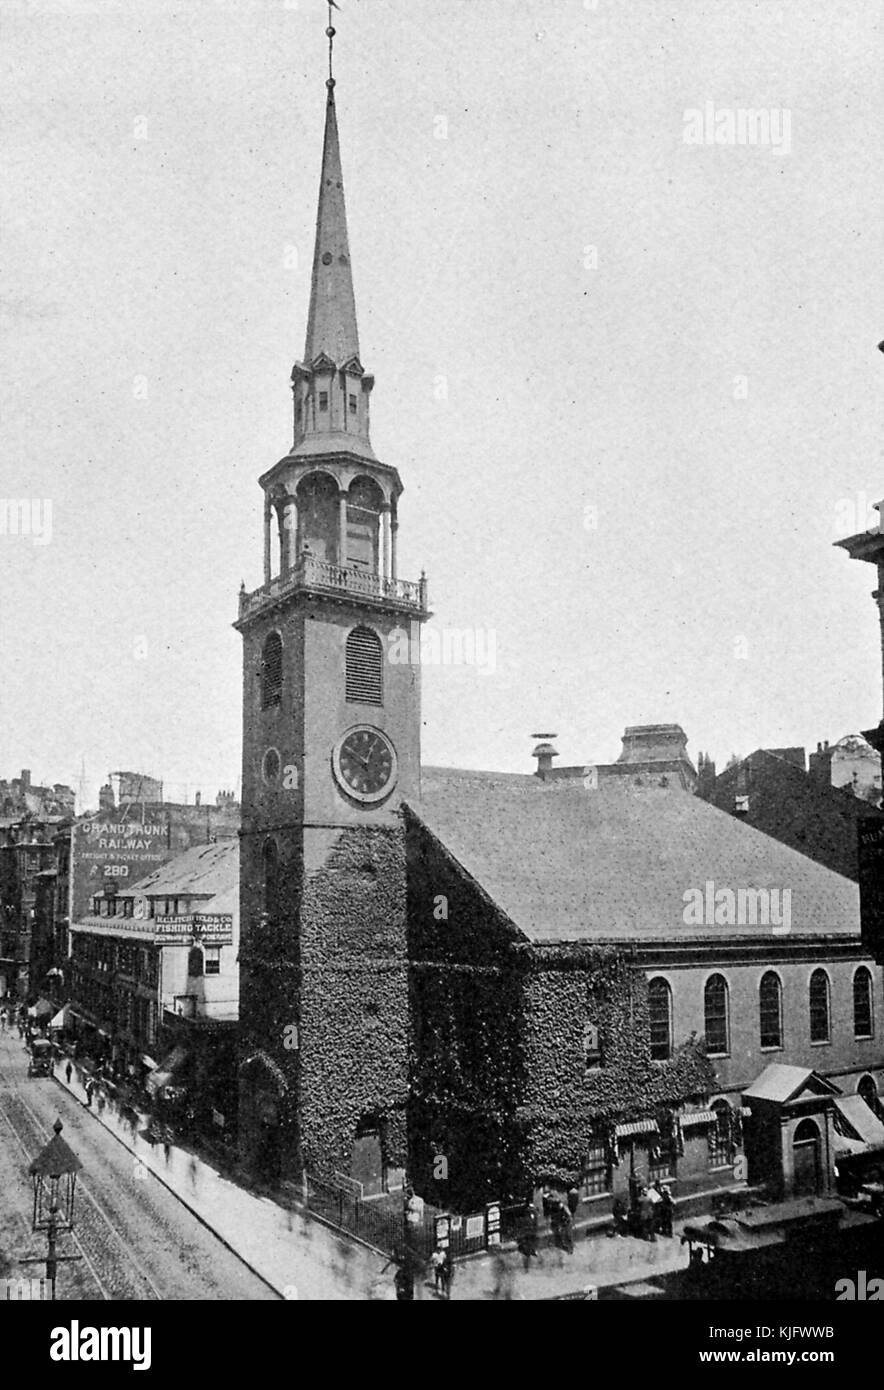 An exterior photograph of Old South Meeting House, the historic church was completed in 1729, it was the meeting place for the organization of the Boston Tea Party, at the time it was the largest building in the city, the blurred outlines of people can be seen on the street in this long exposure, Boston, Massachusetts, 1905. Stock Photo